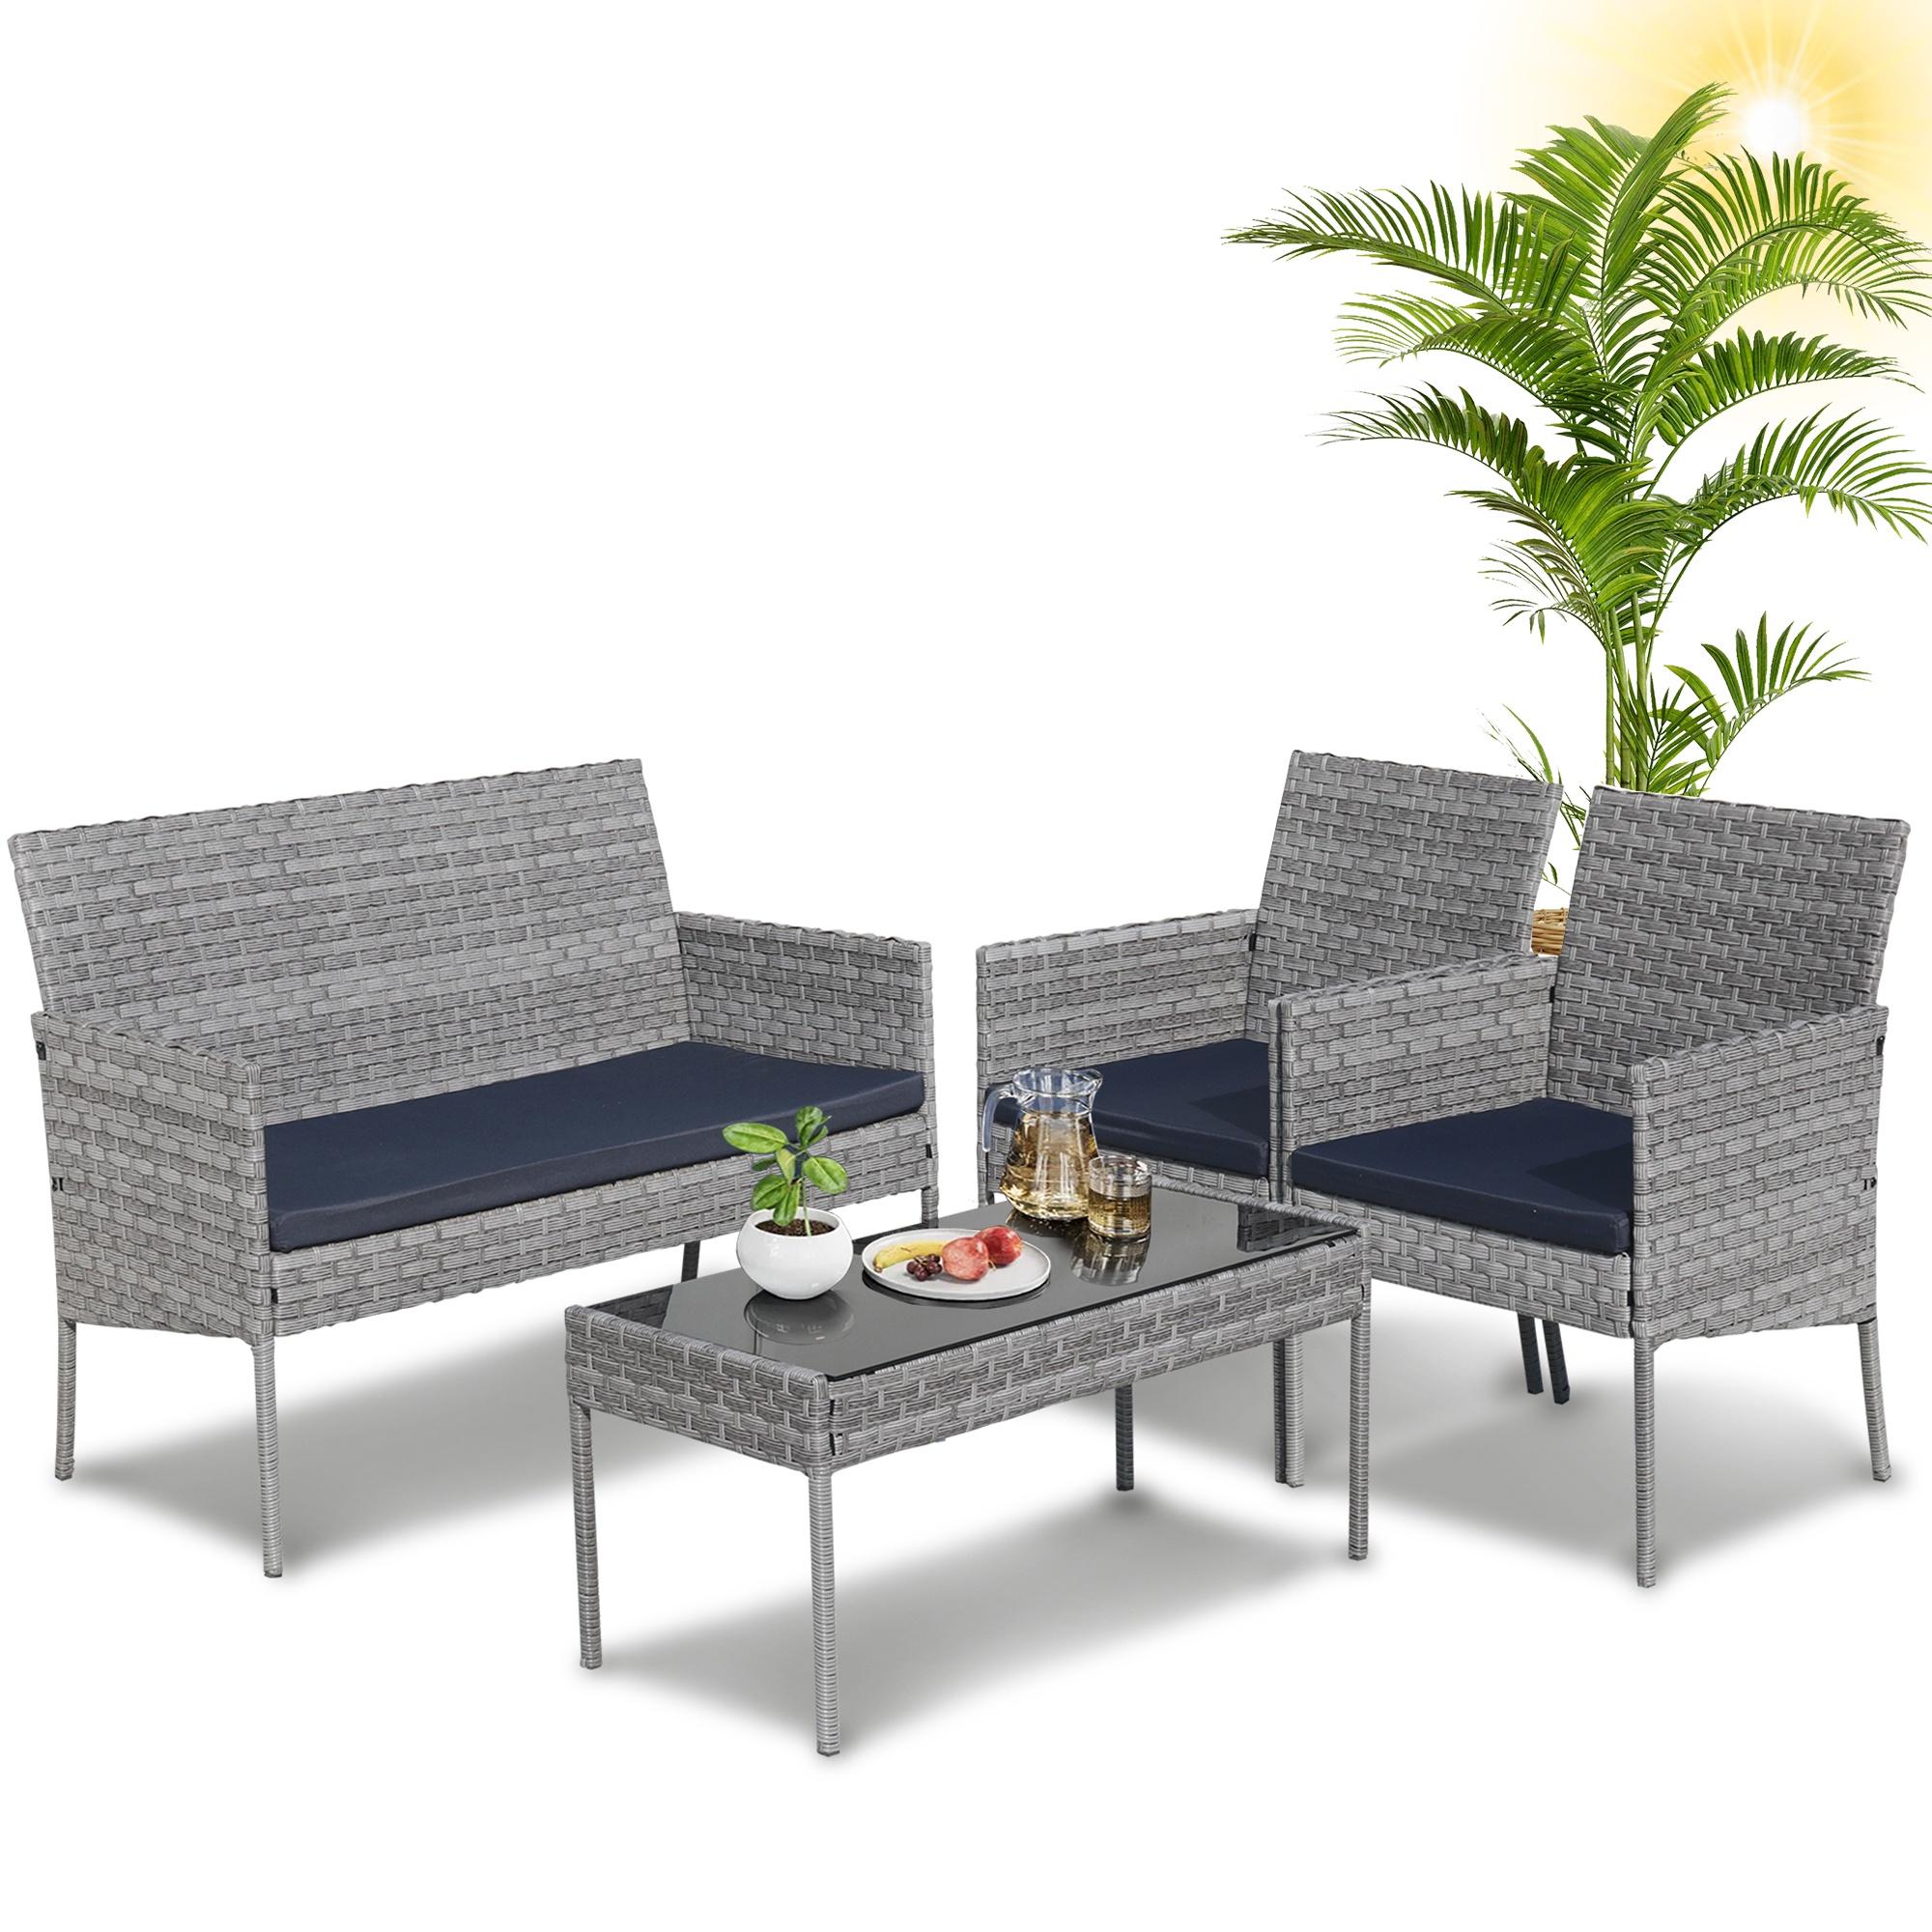 Outdoor Patio Furniture Set, Seizeen 4 Pieces Rattan Conversation Set Cushioned Sofa & Charis, Deck Garden Poolside Furniture Table Set for 4, Gray - image 1 of 11